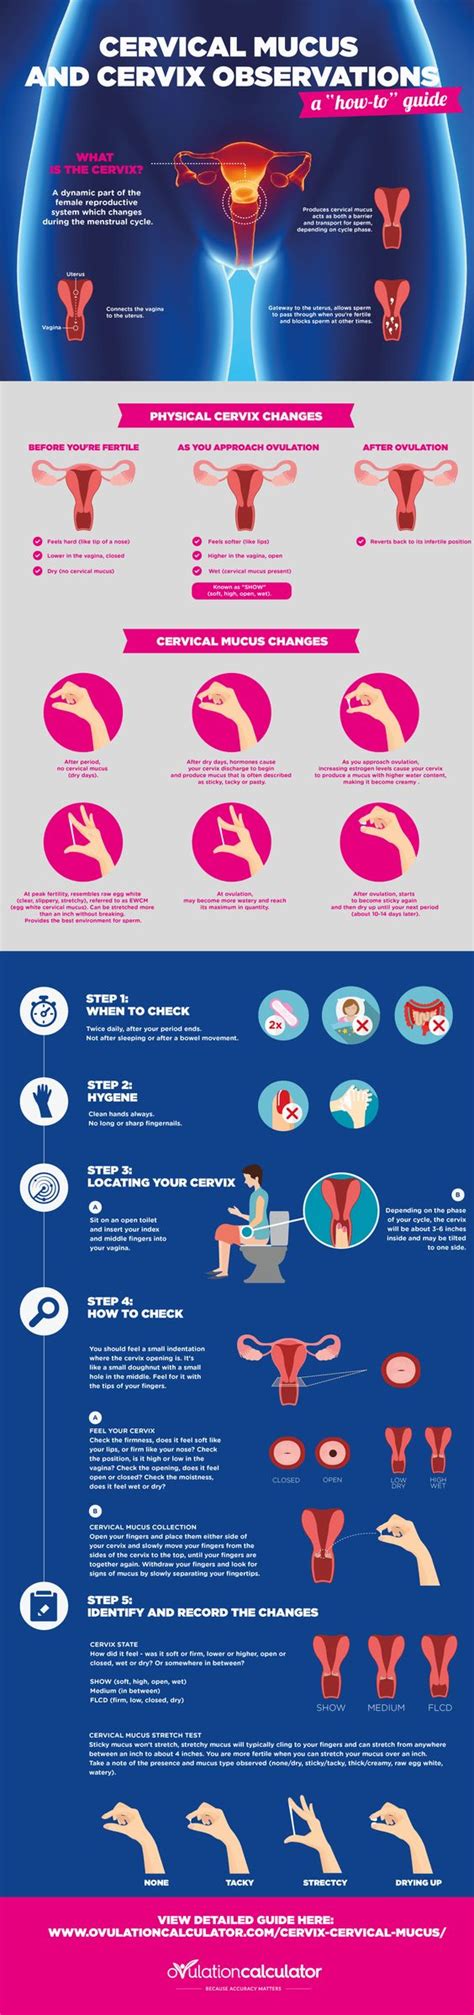 This will help decrease your pushing timeand reduce your chances of swelling. Cervical mucus and Infographic on Pinterest